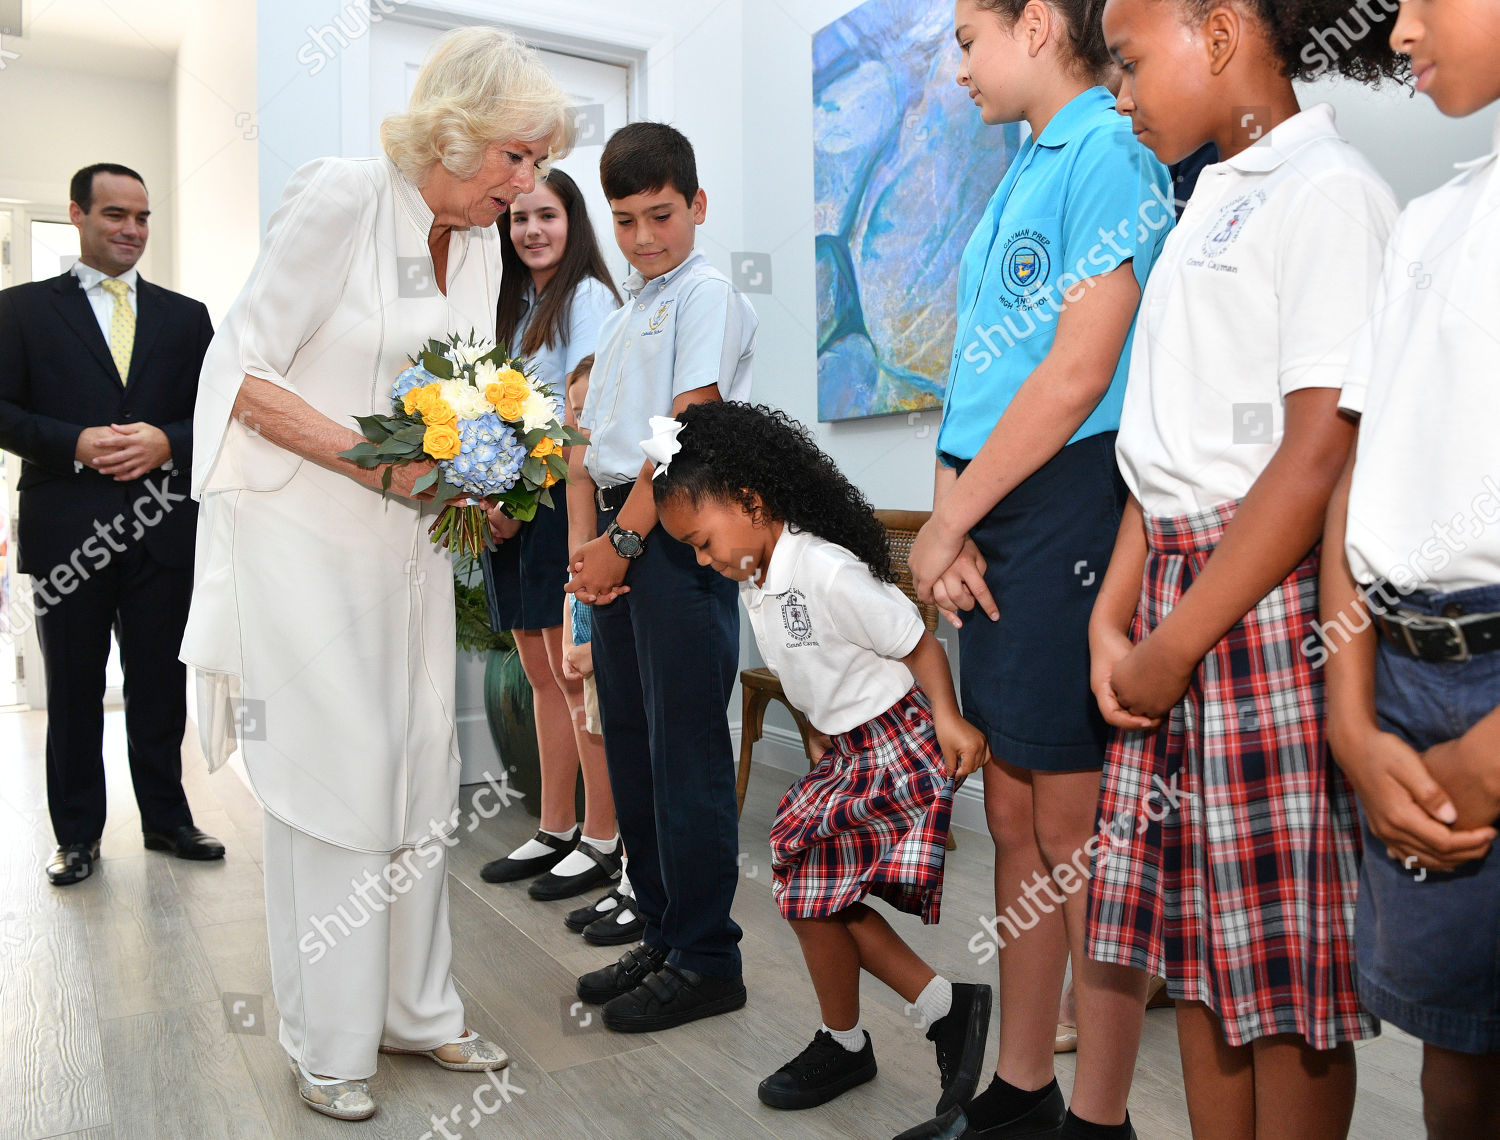 prince-charles-and-camilla-duchess-of-cornwall-caribbean-tour-cayman-islands-shutterstock-editorial-10180820q.jpg